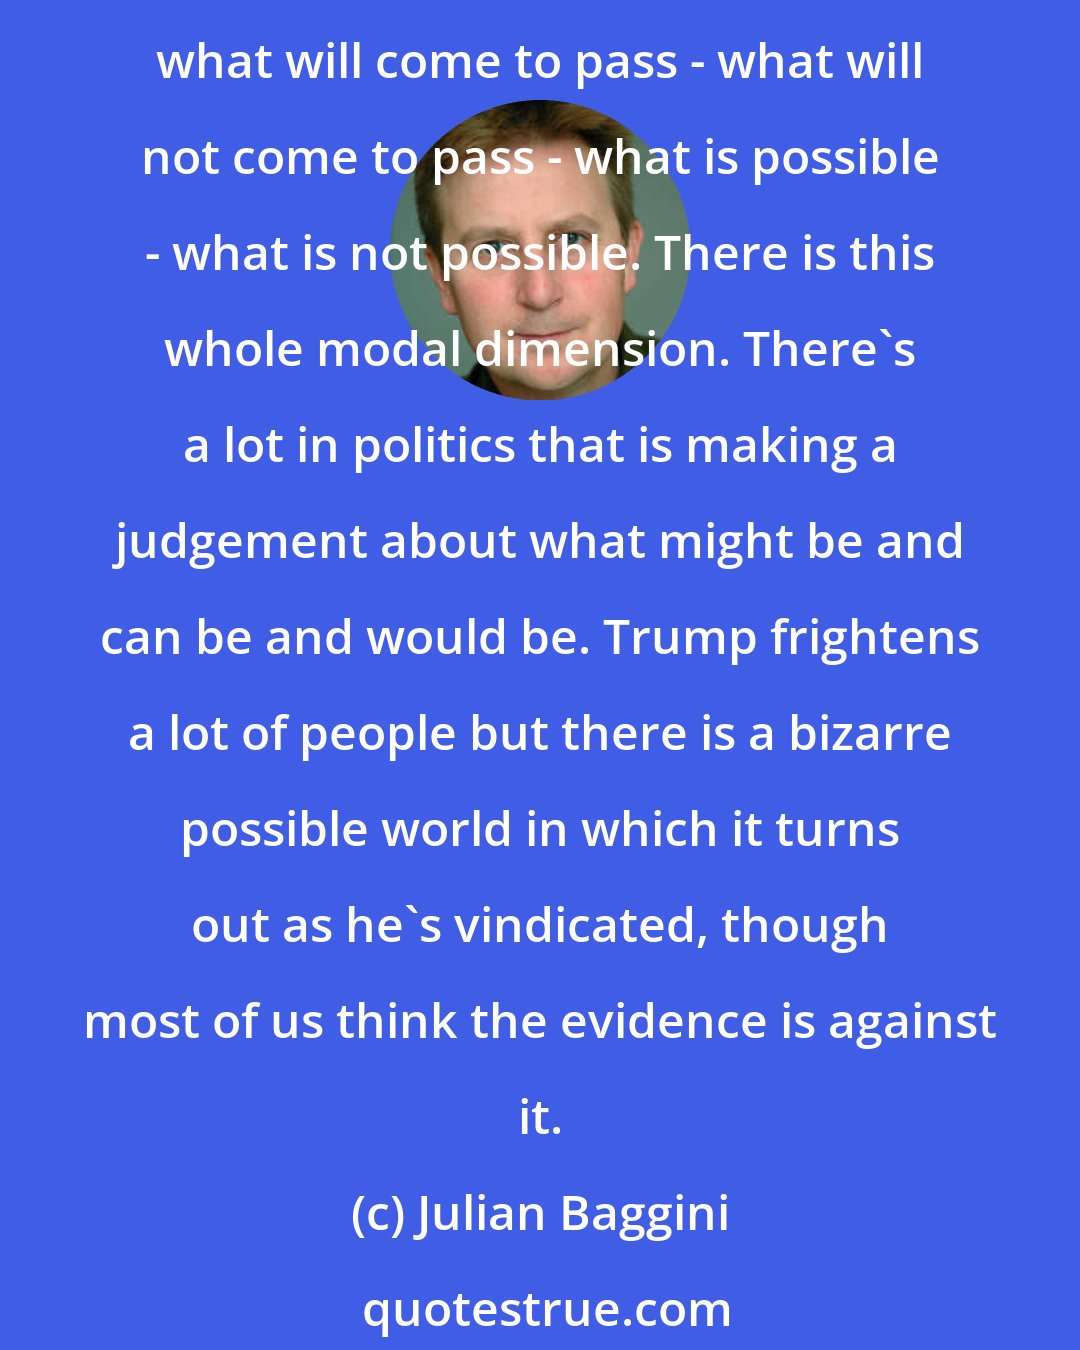 Julian Baggini: In the case of Donald Trump I think you've got to accept that a lot of what's going on in political discourse is based upon judgement. How the economy works - how people work - what will come to pass - what will not come to pass - what is possible - what is not possible. There is this whole modal dimension. There's a lot in politics that is making a judgement about what might be and can be and would be. Trump frightens a lot of people but there is a bizarre possible world in which it turns out as he's vindicated, though most of us think the evidence is against it.